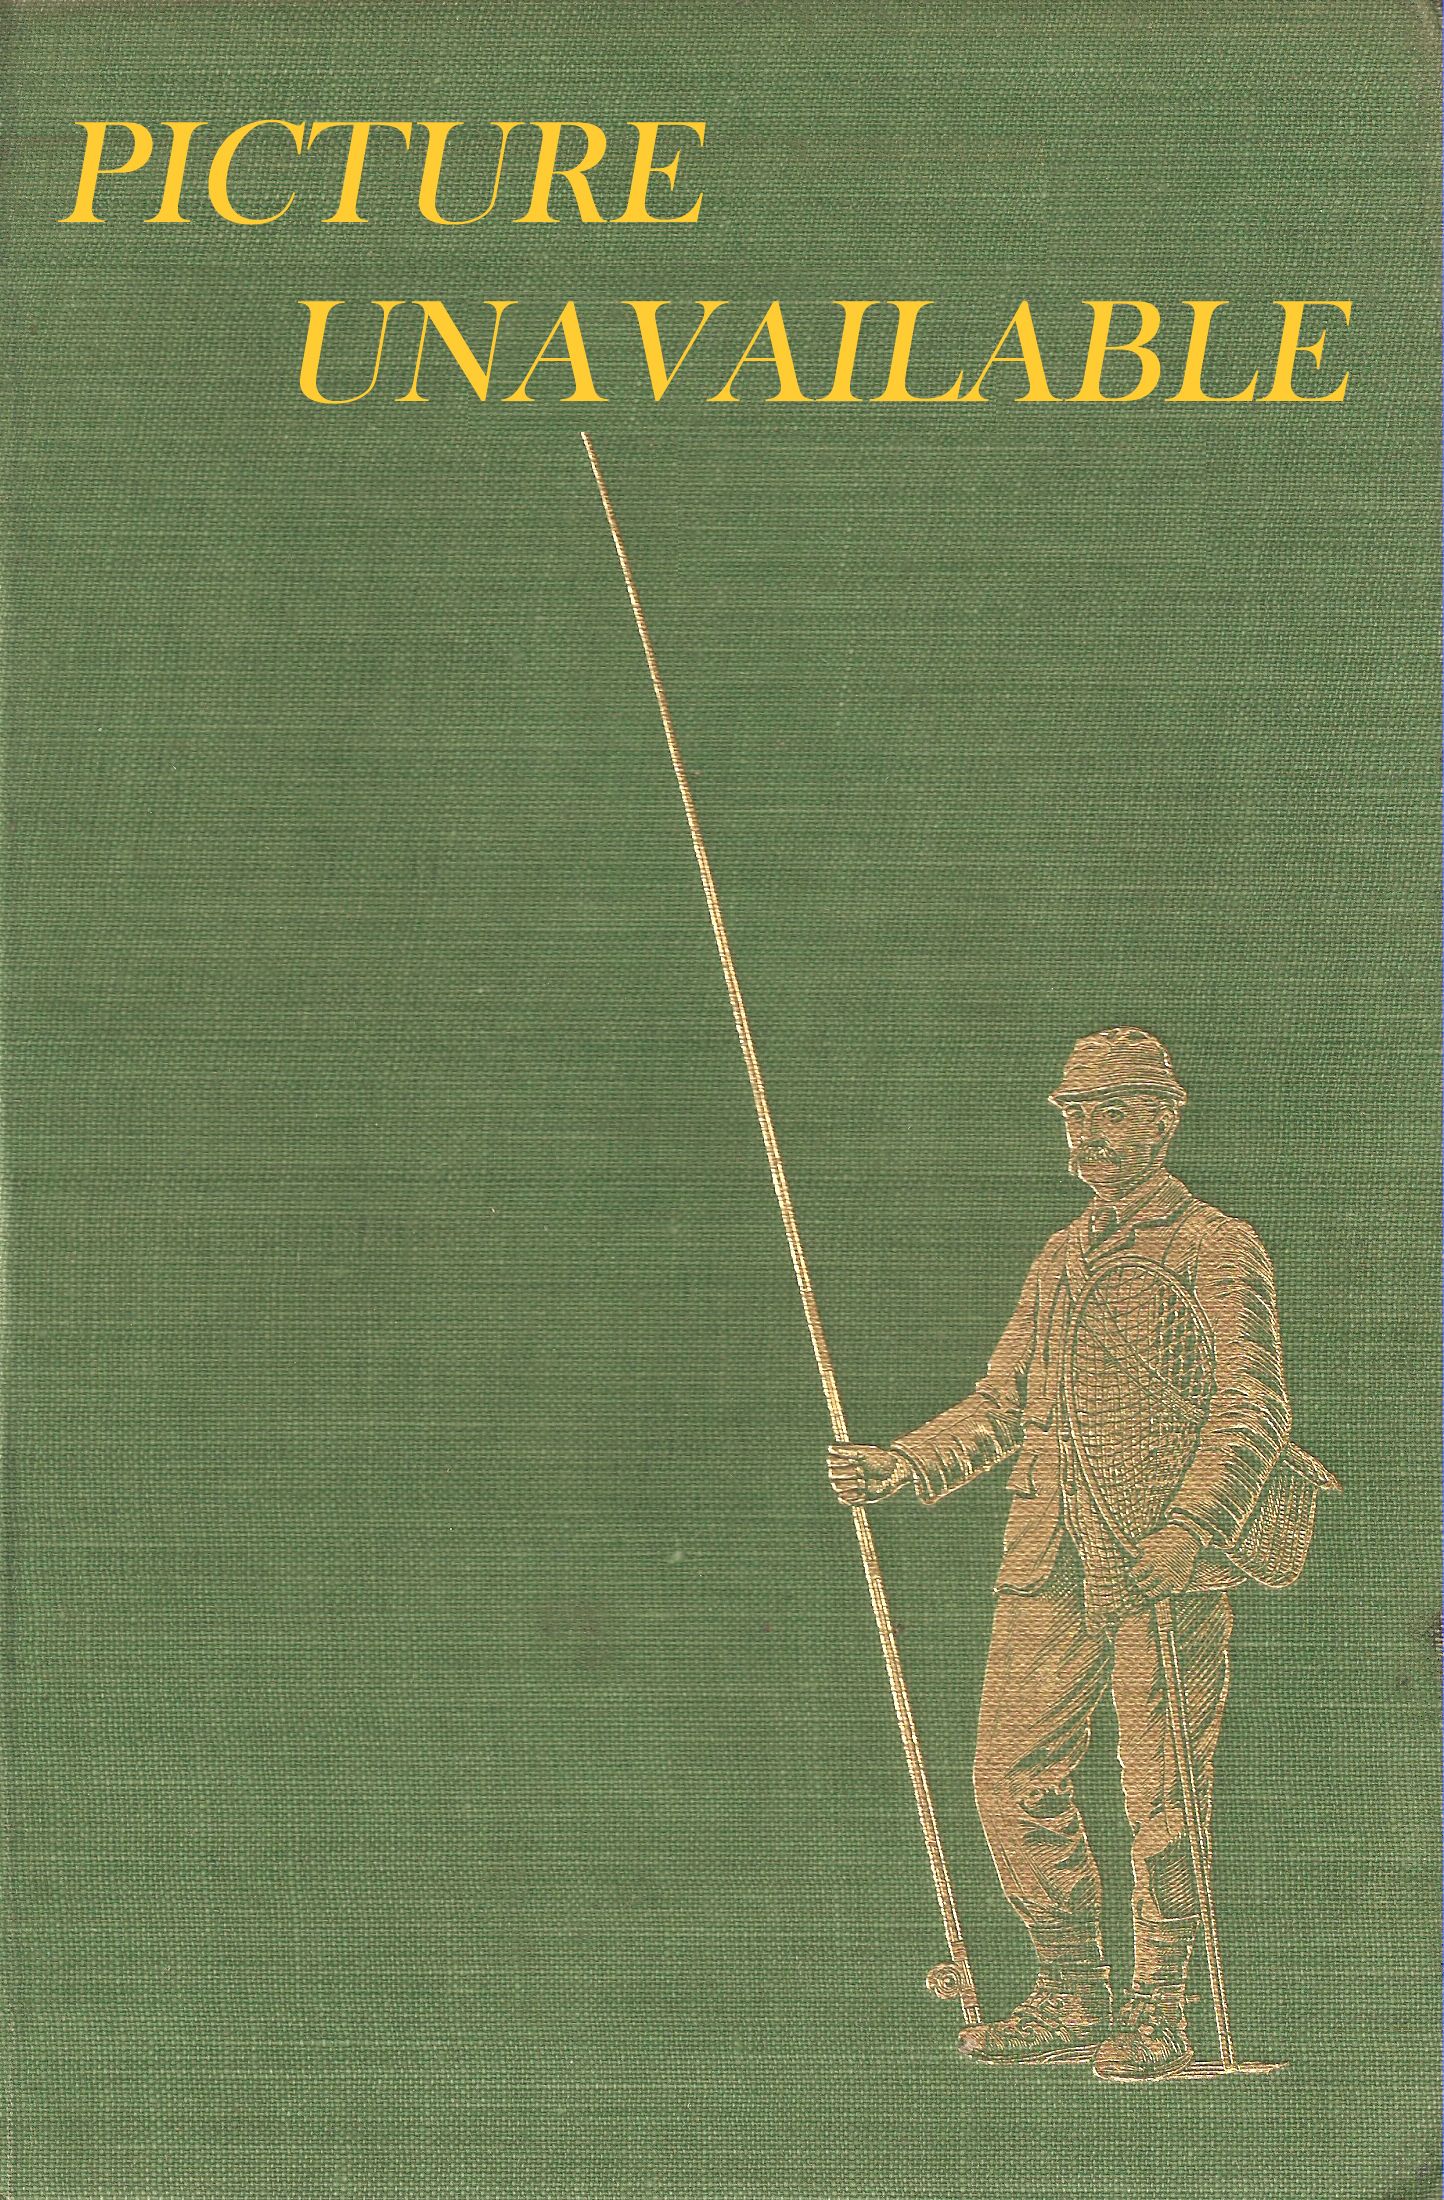 THE PASSIONATE ANGLER. By Maurice Wiggin. First edition.